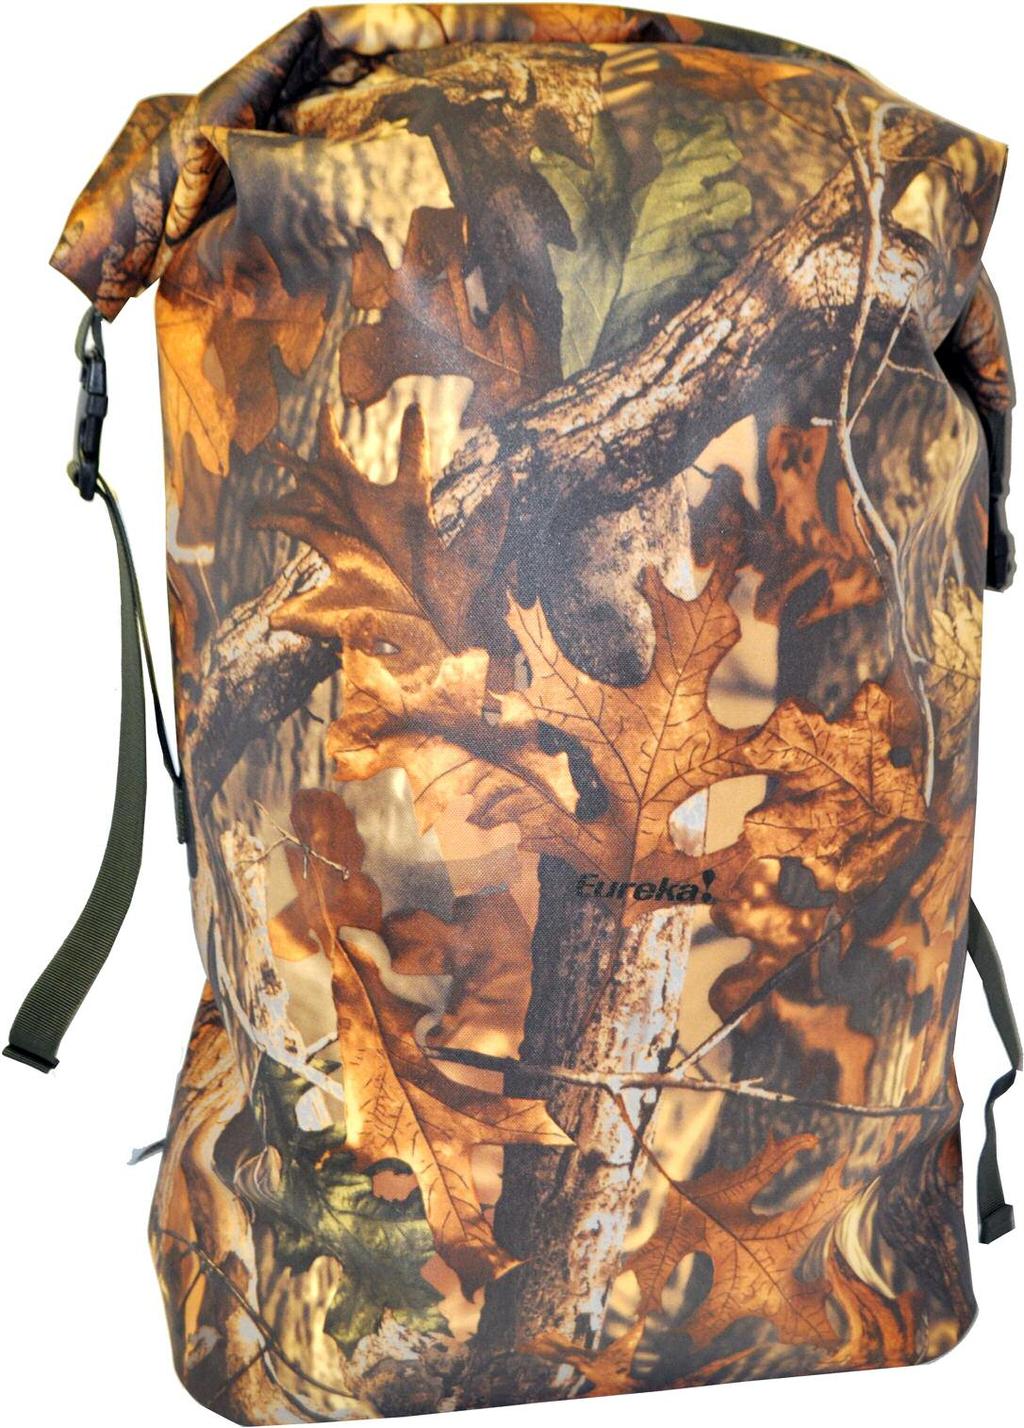 8oz/1727g Canoe Pack SS115 uses a fully padded expedition hipbelt.